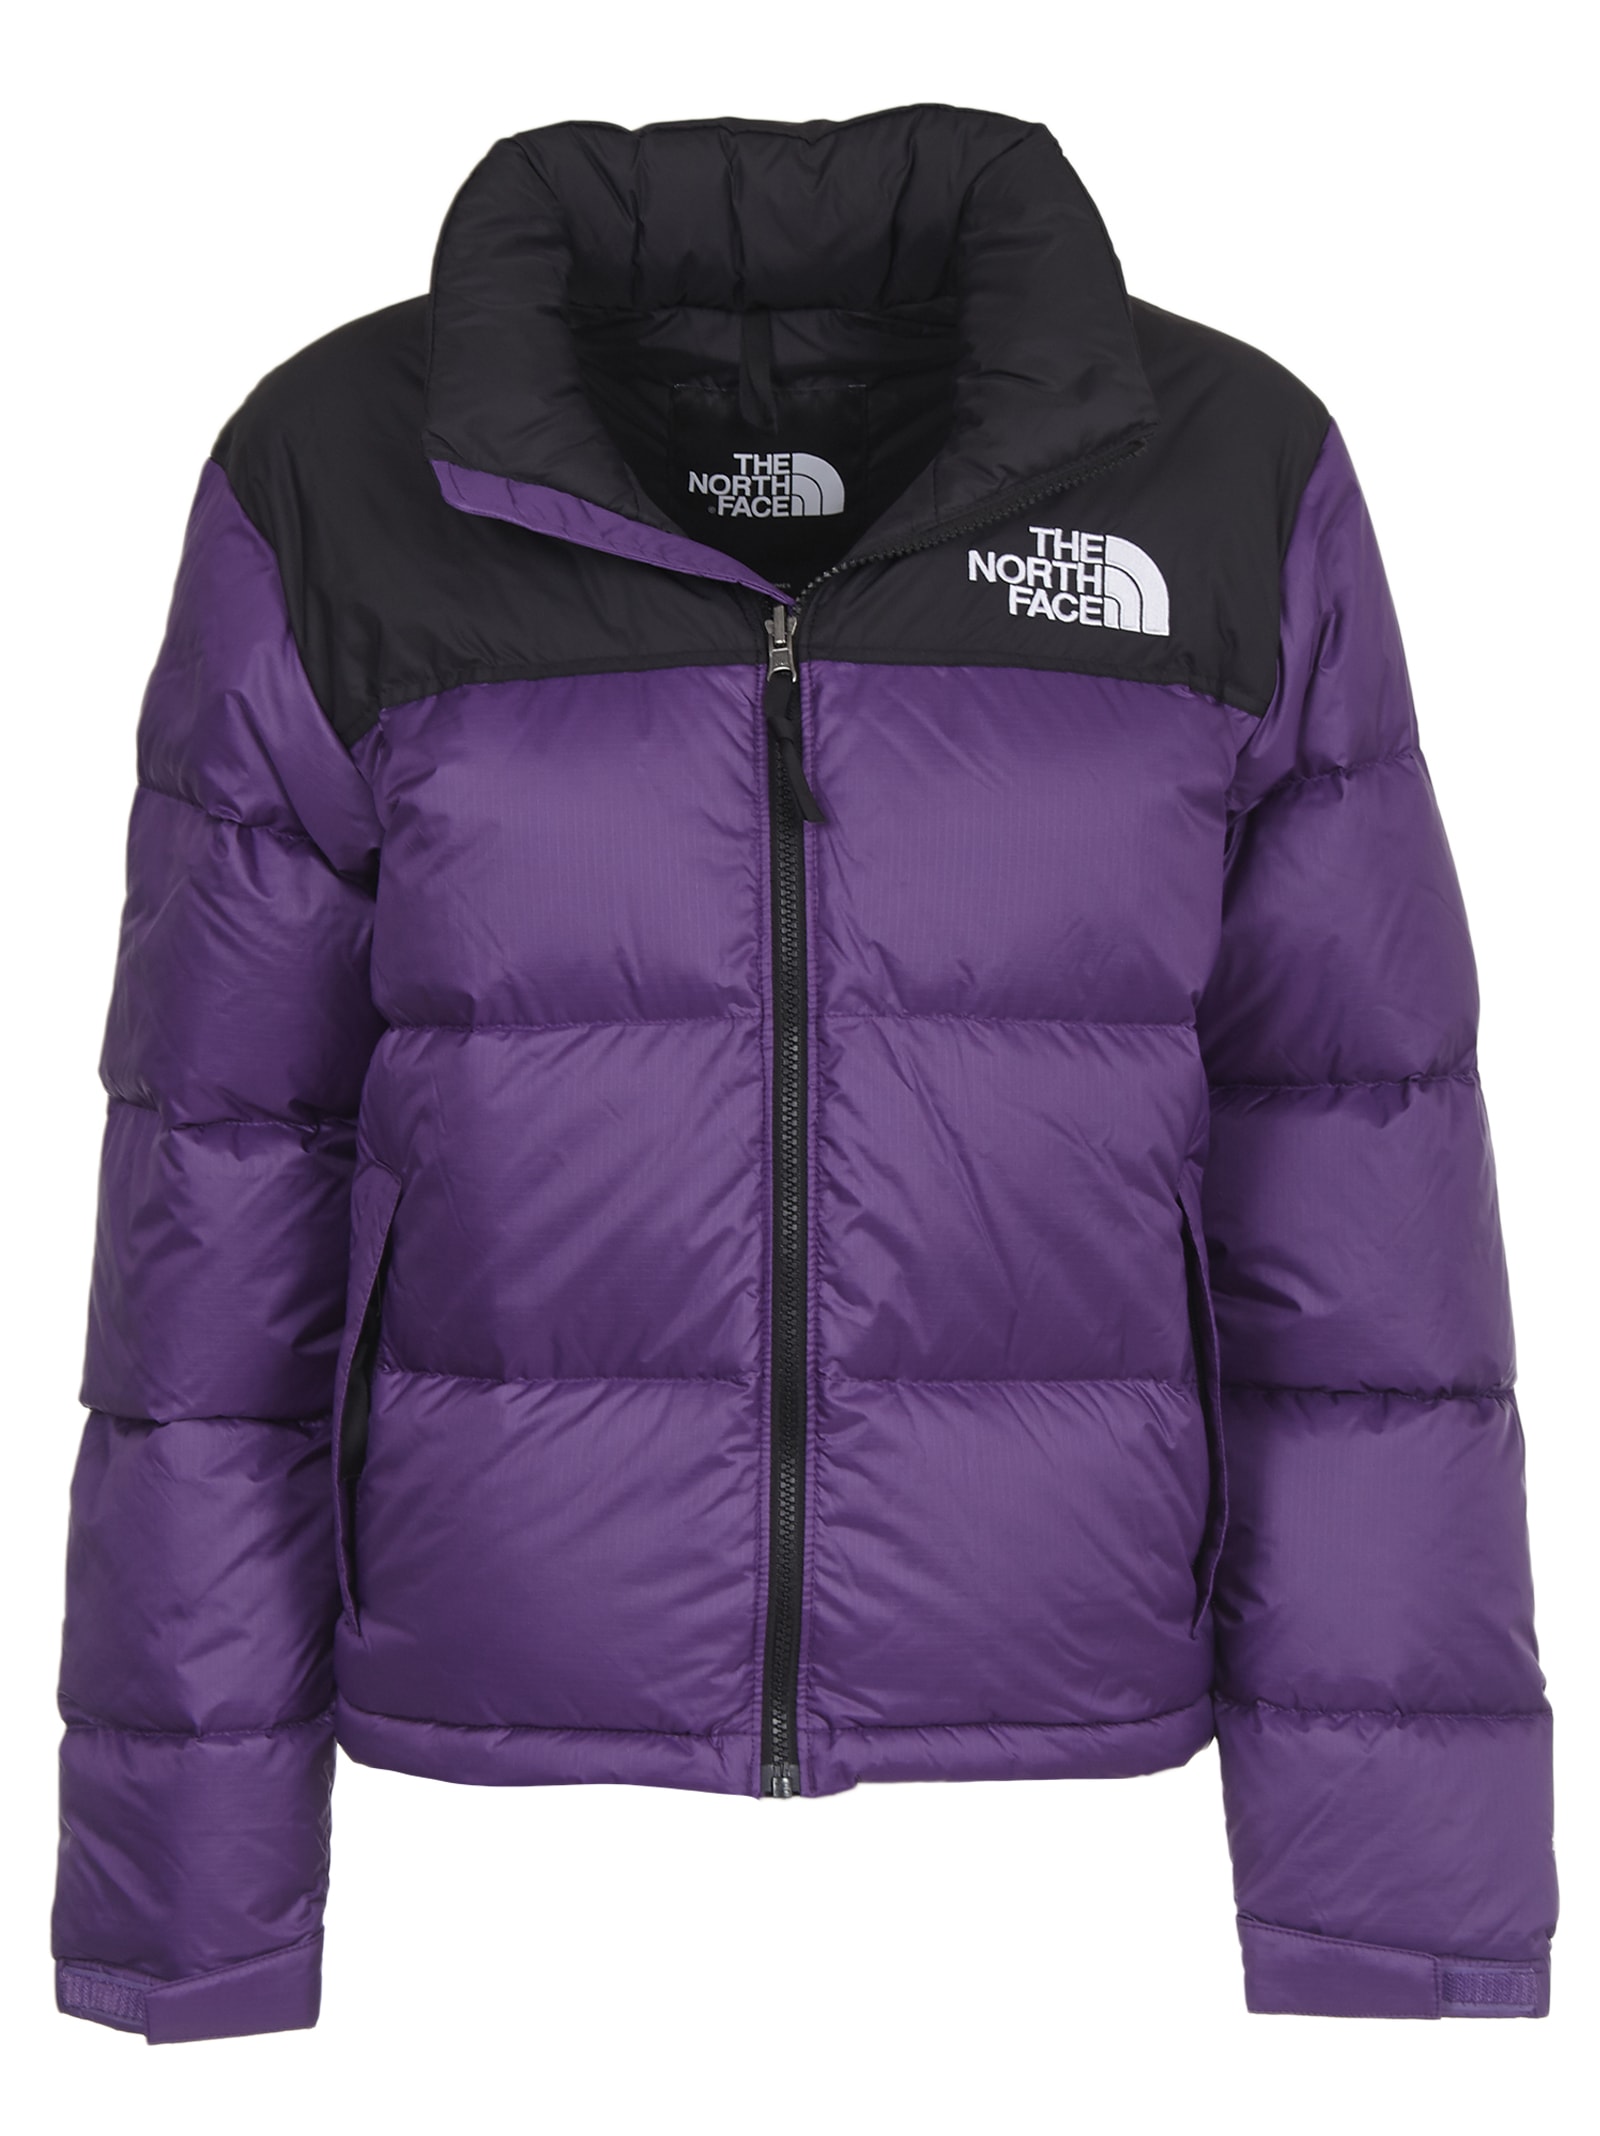 The North Face The North Face Nuptse 1996 Purple And Black Jacket ...